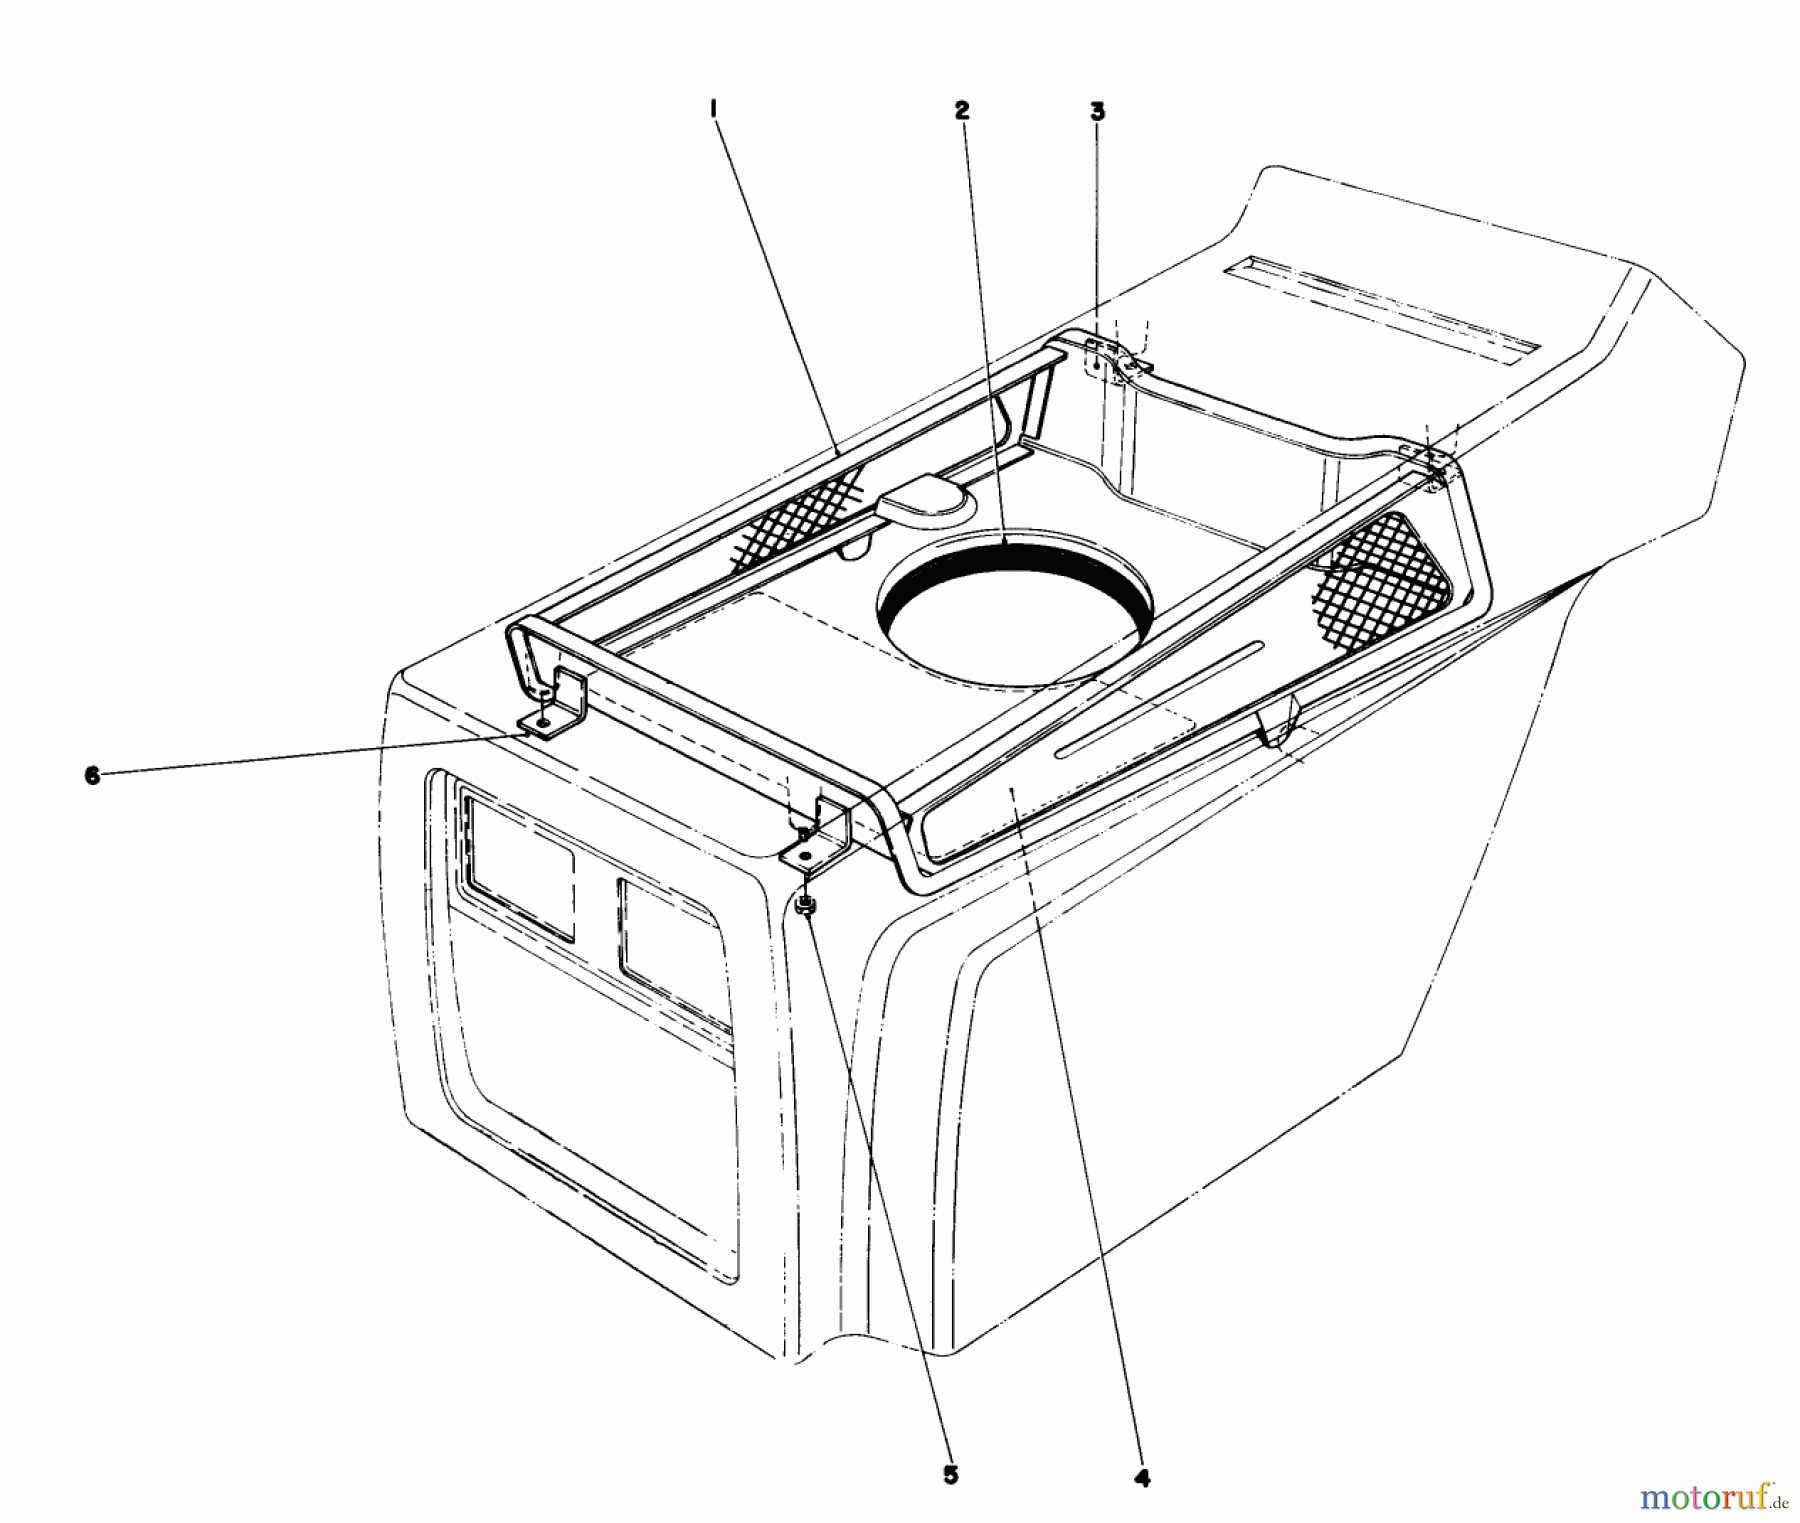  Toro Neu Mowers, Lawn & Garden Tractor Seite 1 57356 (11-42) - Toro 11-42 Lawn Tractor, 1984 (4000001-4999999) HOOD DUCT ASSEMBLY